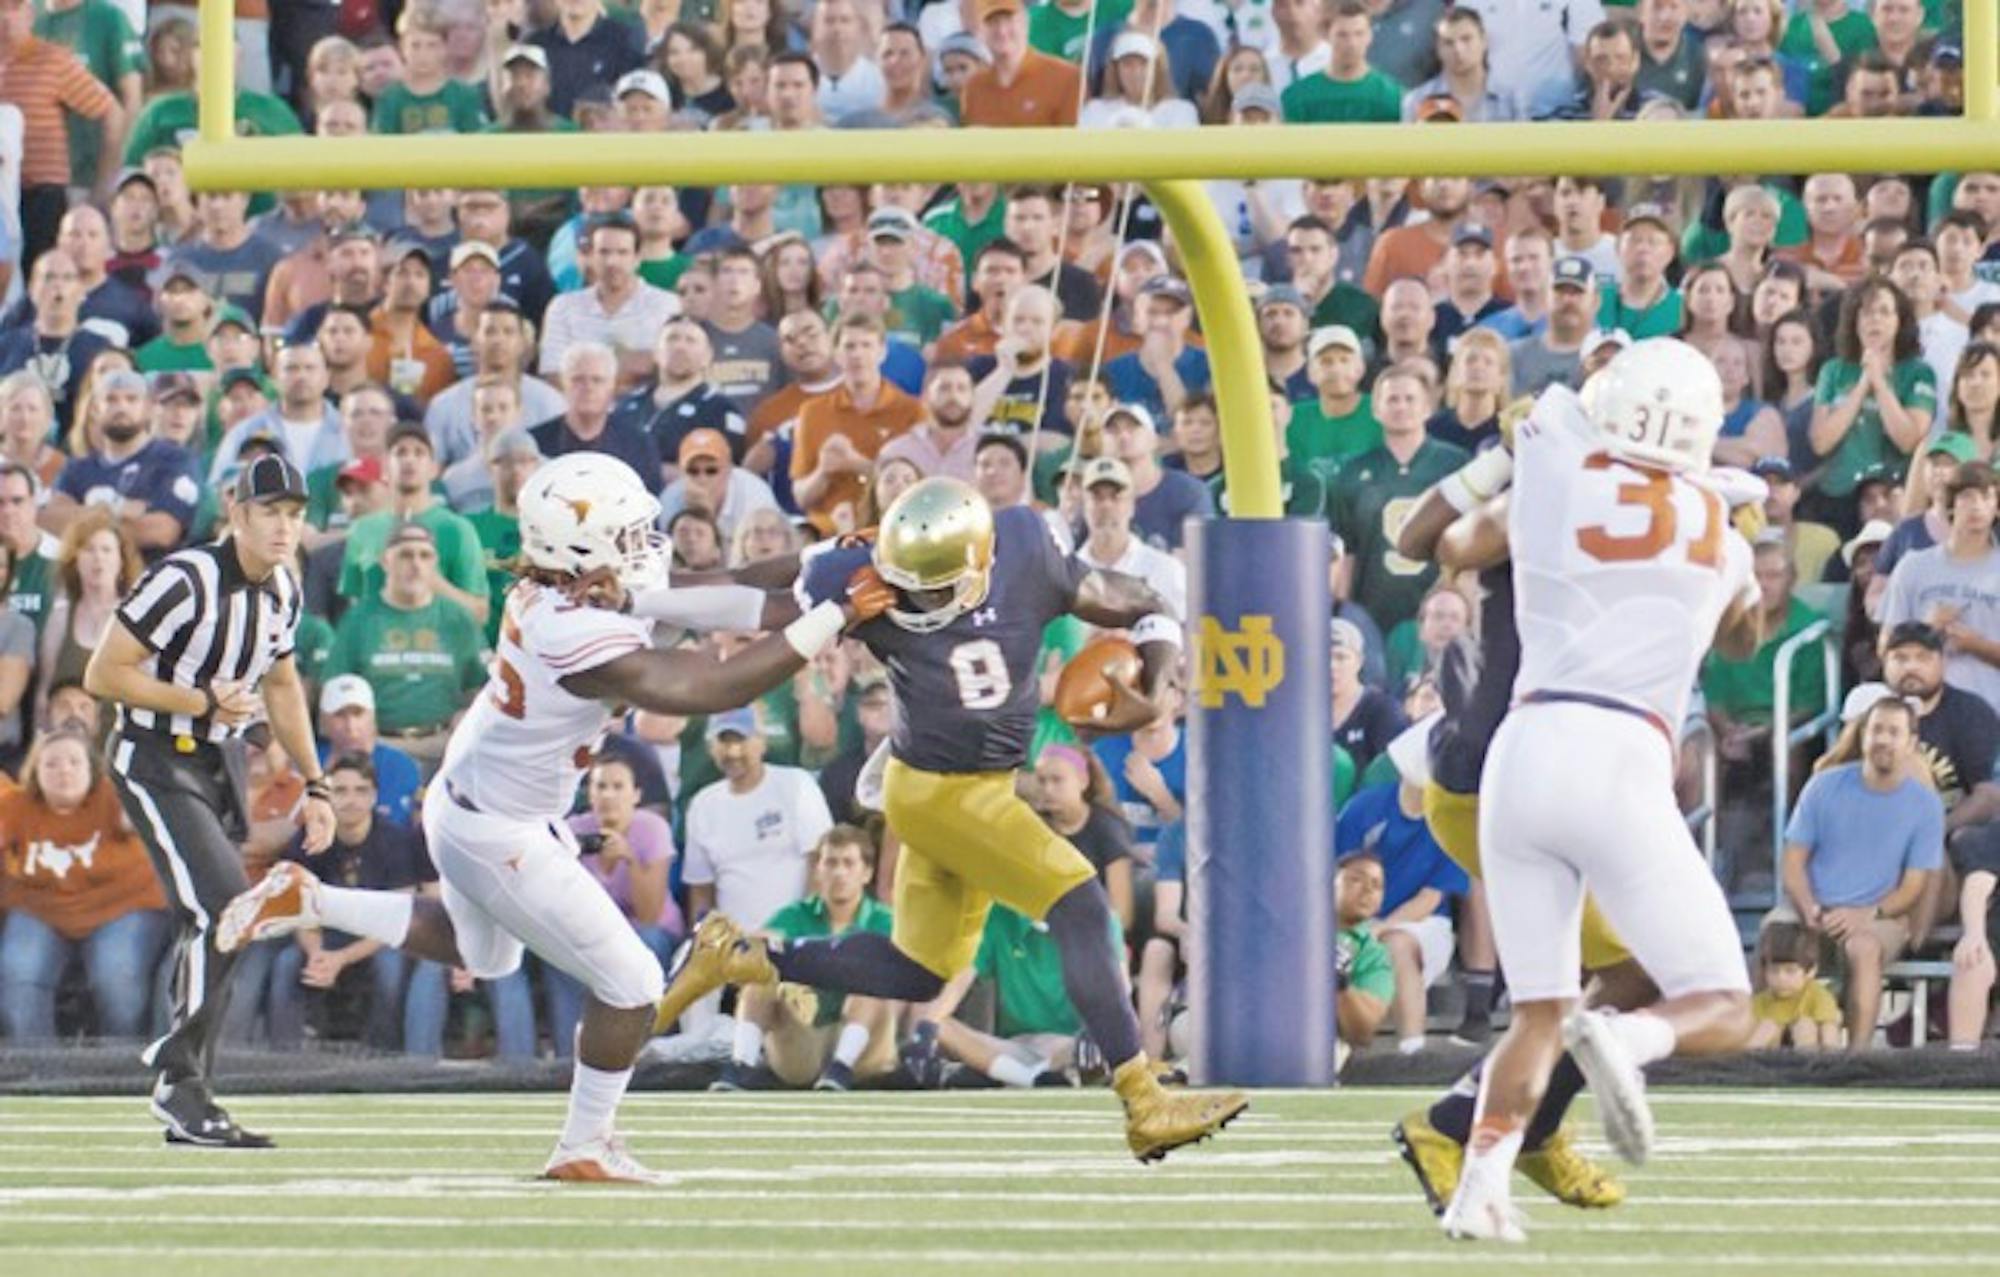 Irish senior quarterback Malik Zaire stiff arms a defender during Notre Dame’s 38-3 win over Texas on Sept. 5 at Notre Dame Stadium. Zaire threw for 313 yards in the Irish rout.